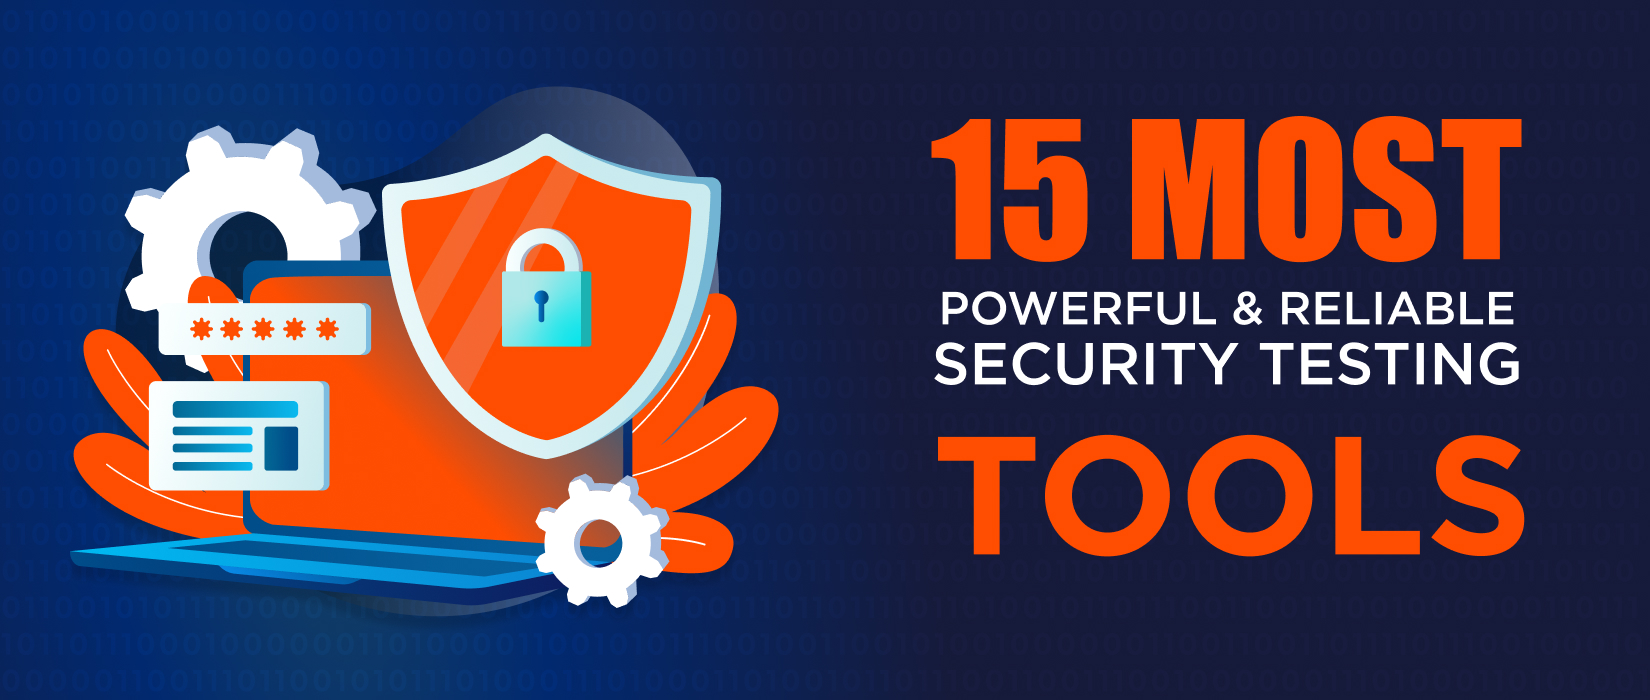 15 Most Powerful & Reliable Security Testing Tools